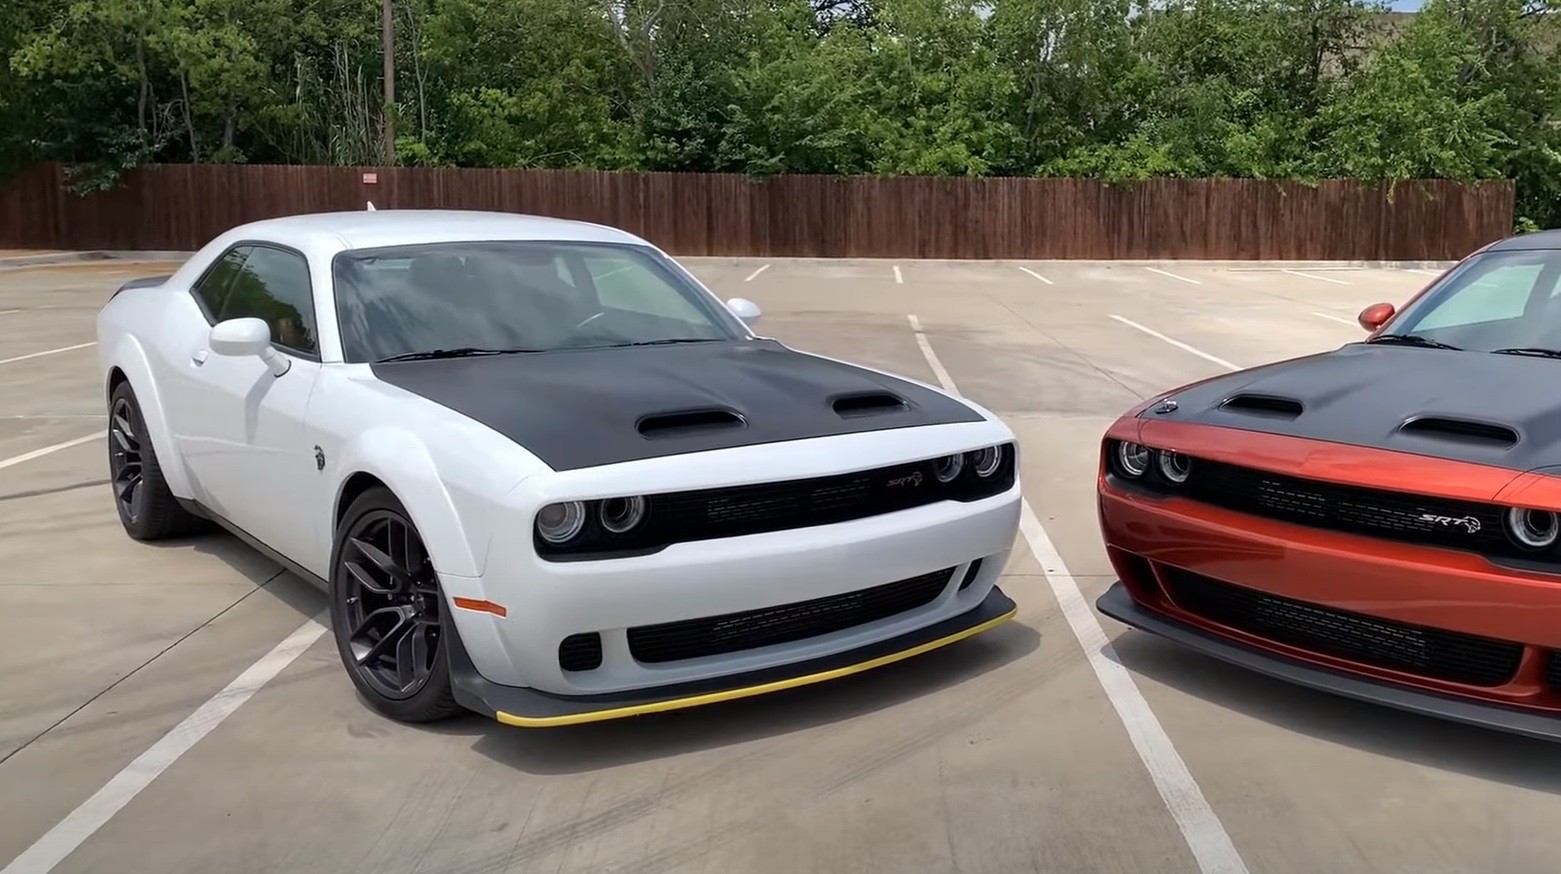 Dodge Challenger SRT Super Stock Vs Redeye - Which Is the Overall Better  Choice? - autoevolution